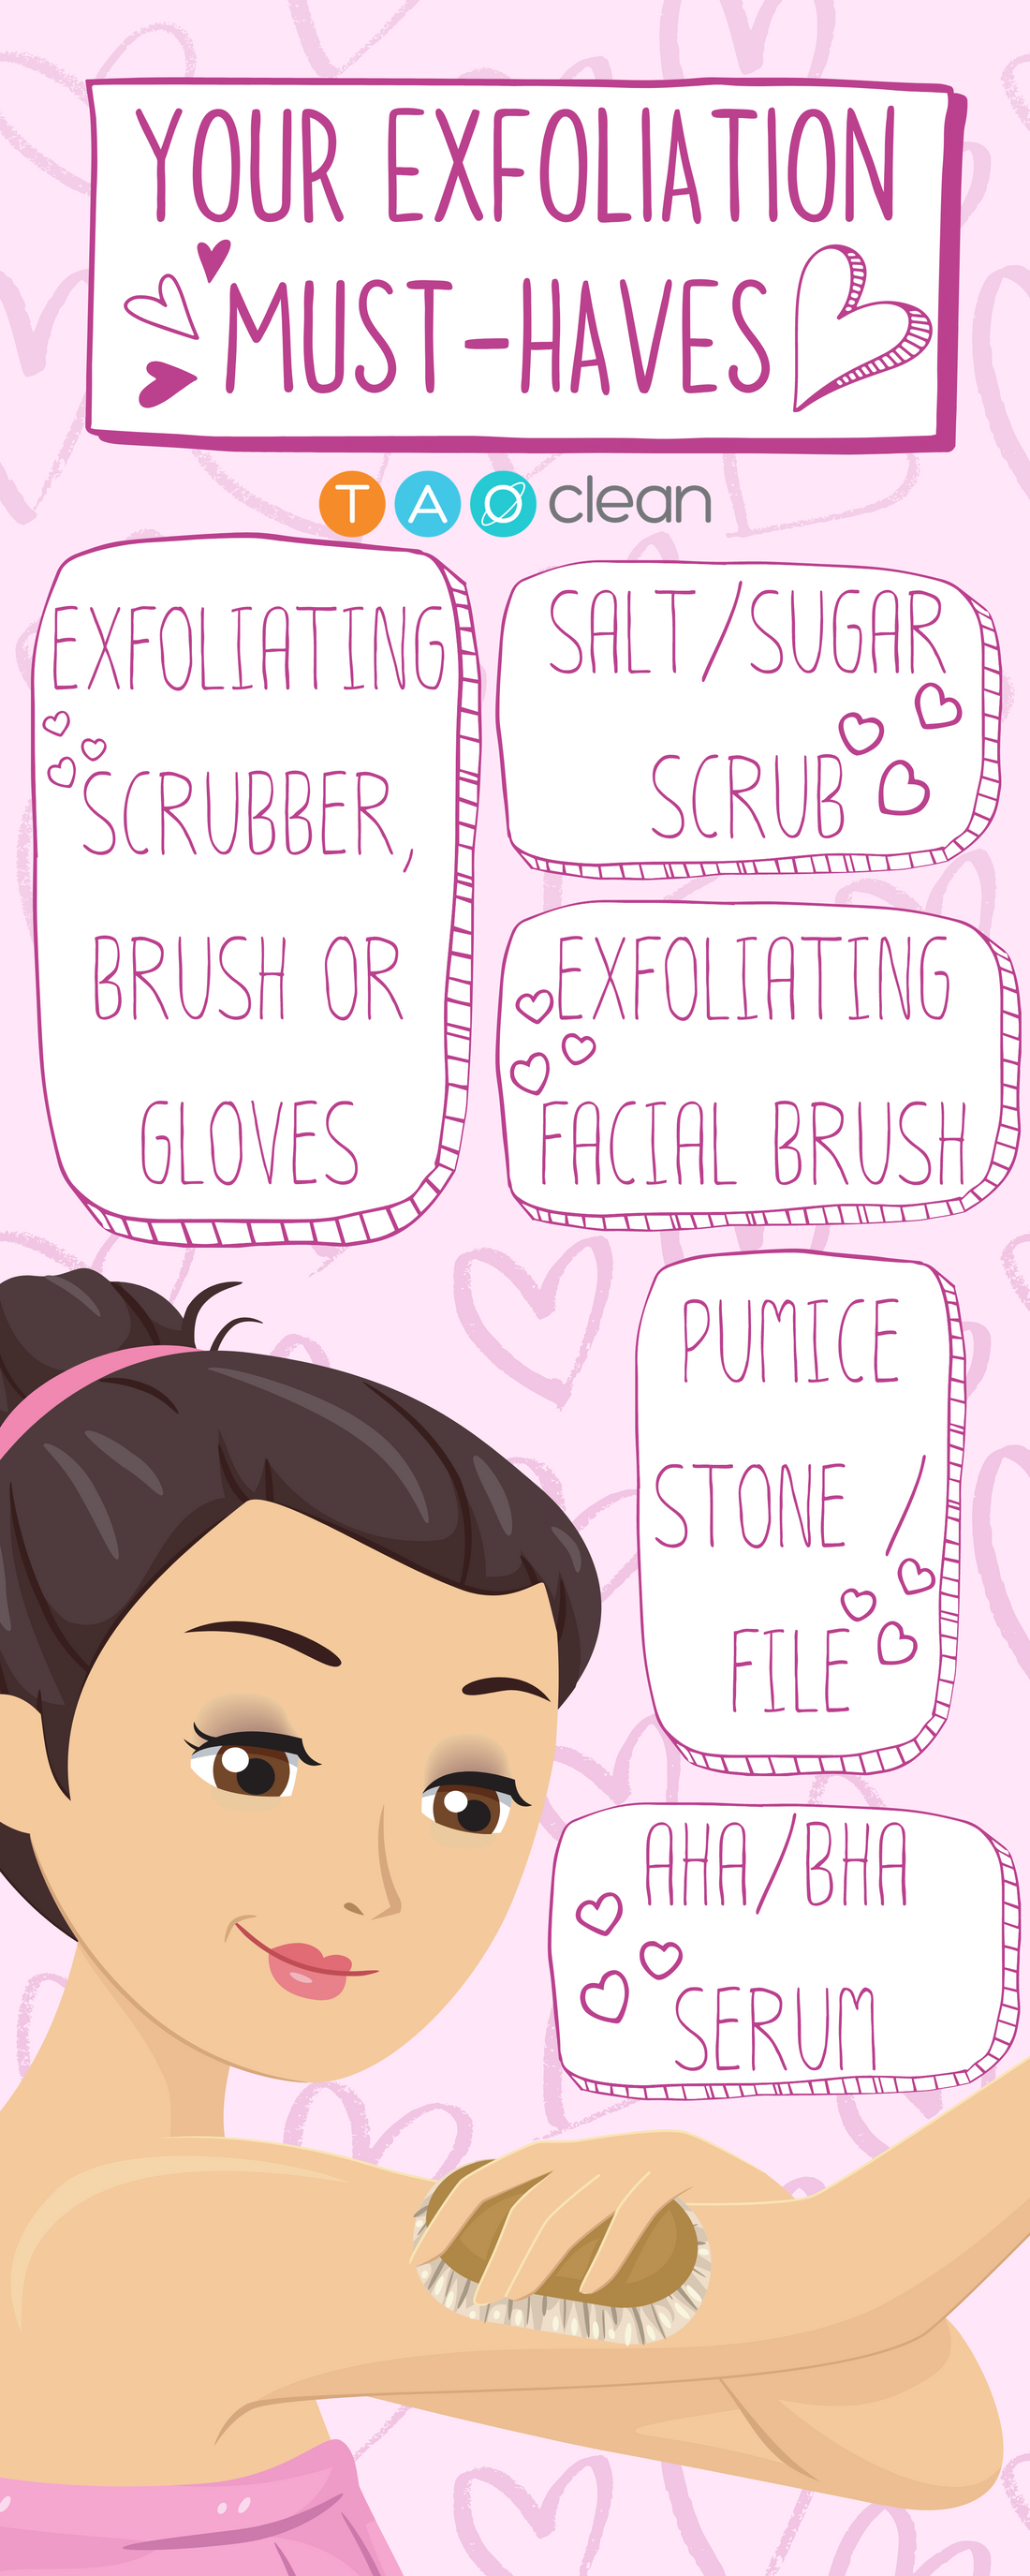 Your Exfoliation Must-Haves